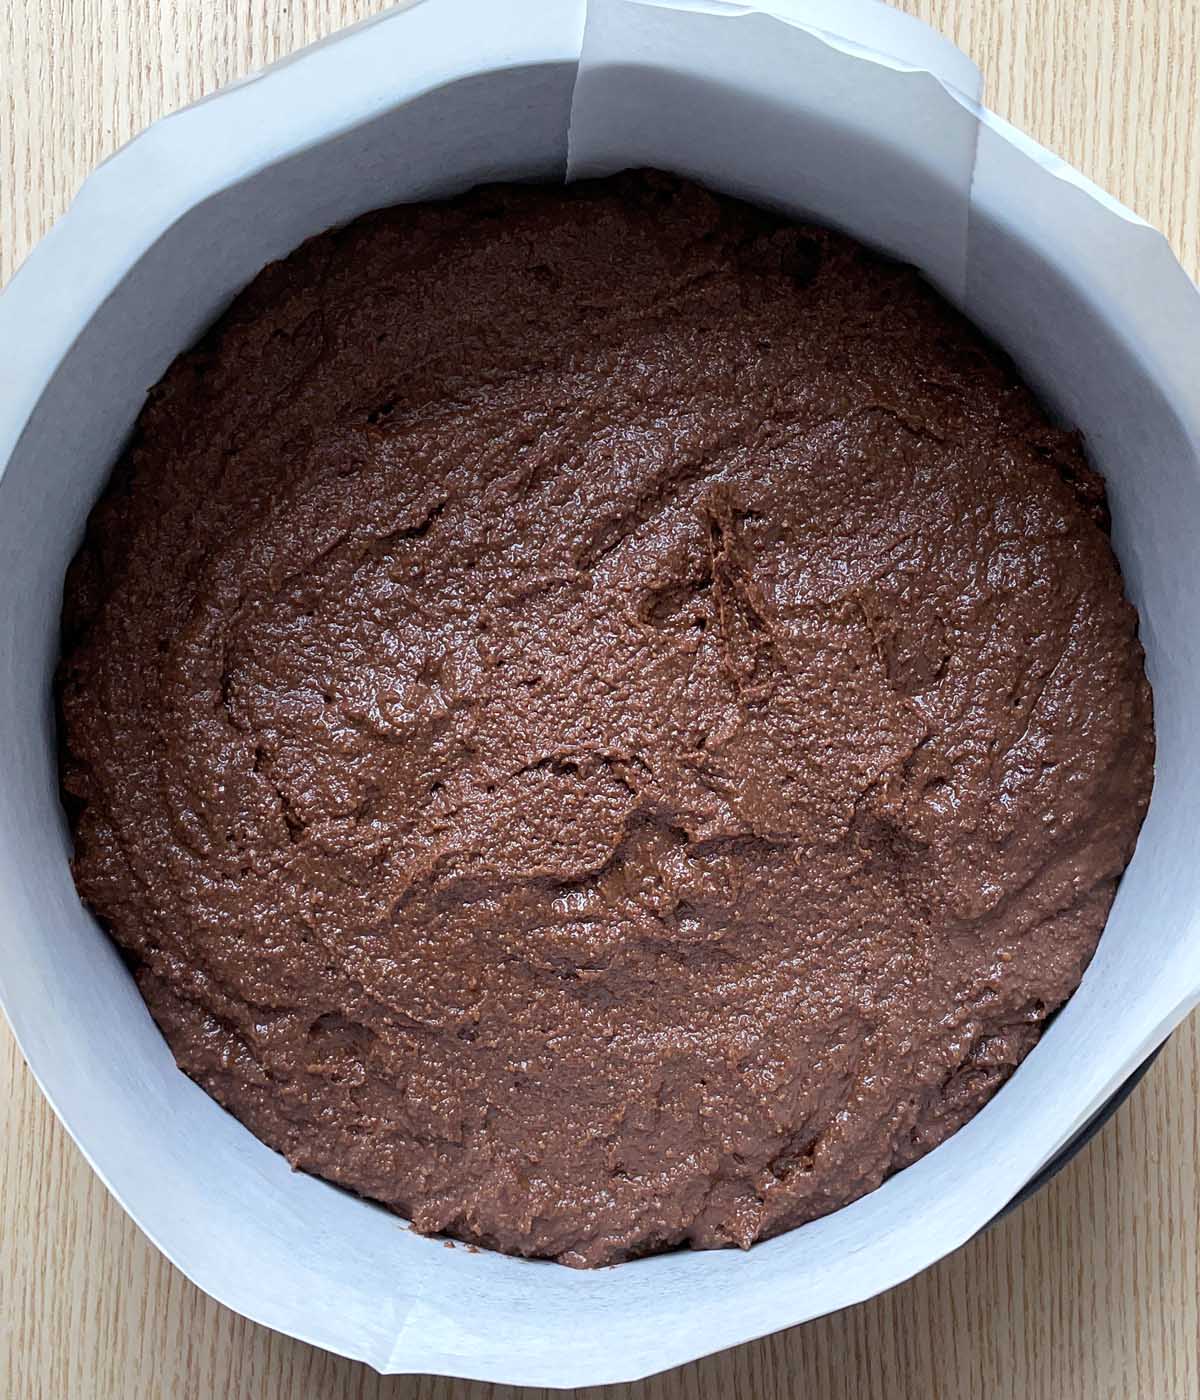 Brown cake batter in a round pan lined with white paper.